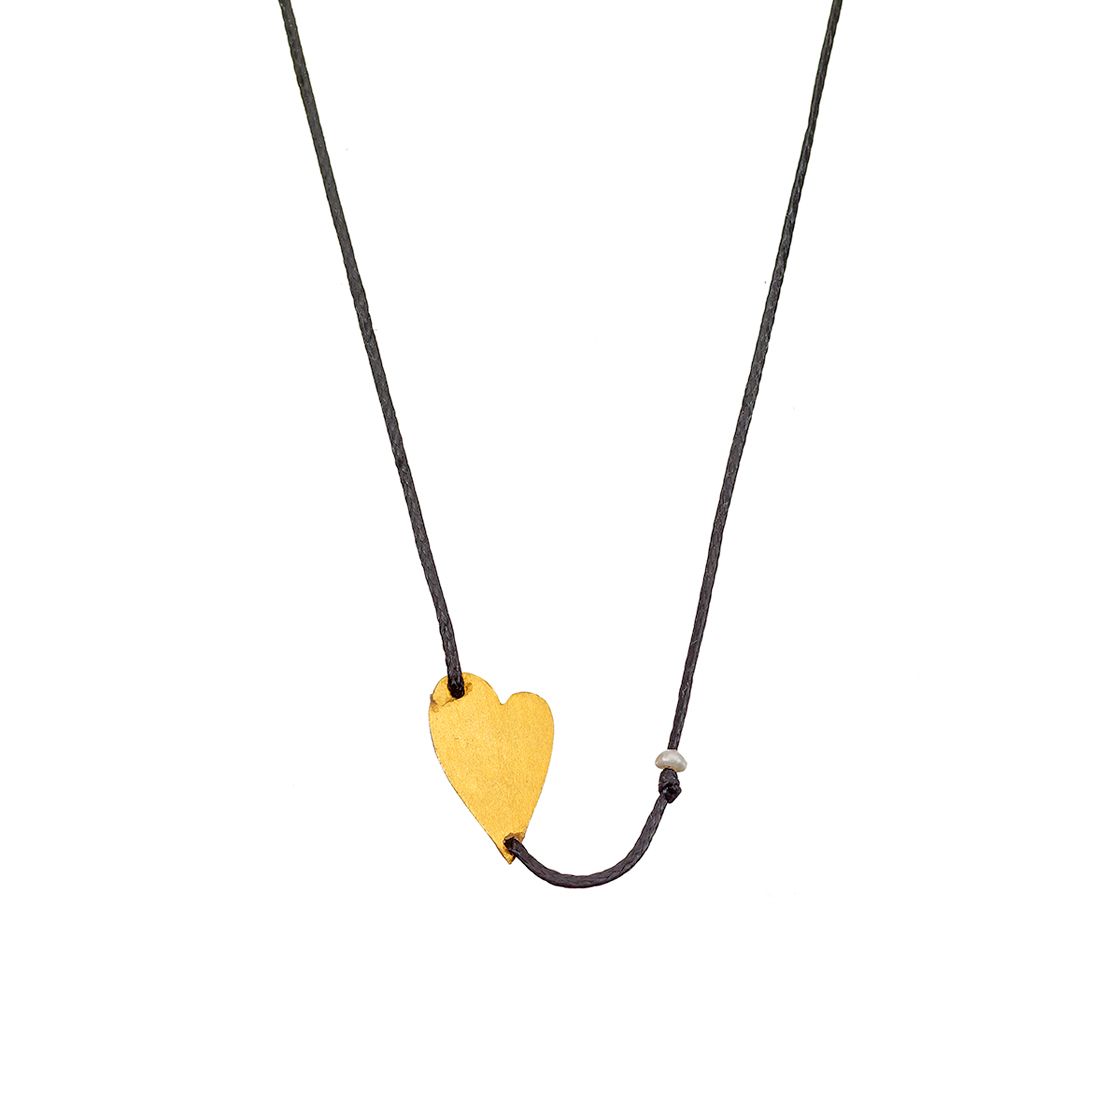 Double-pierced gold heart charm with pearl on black waxed cord.